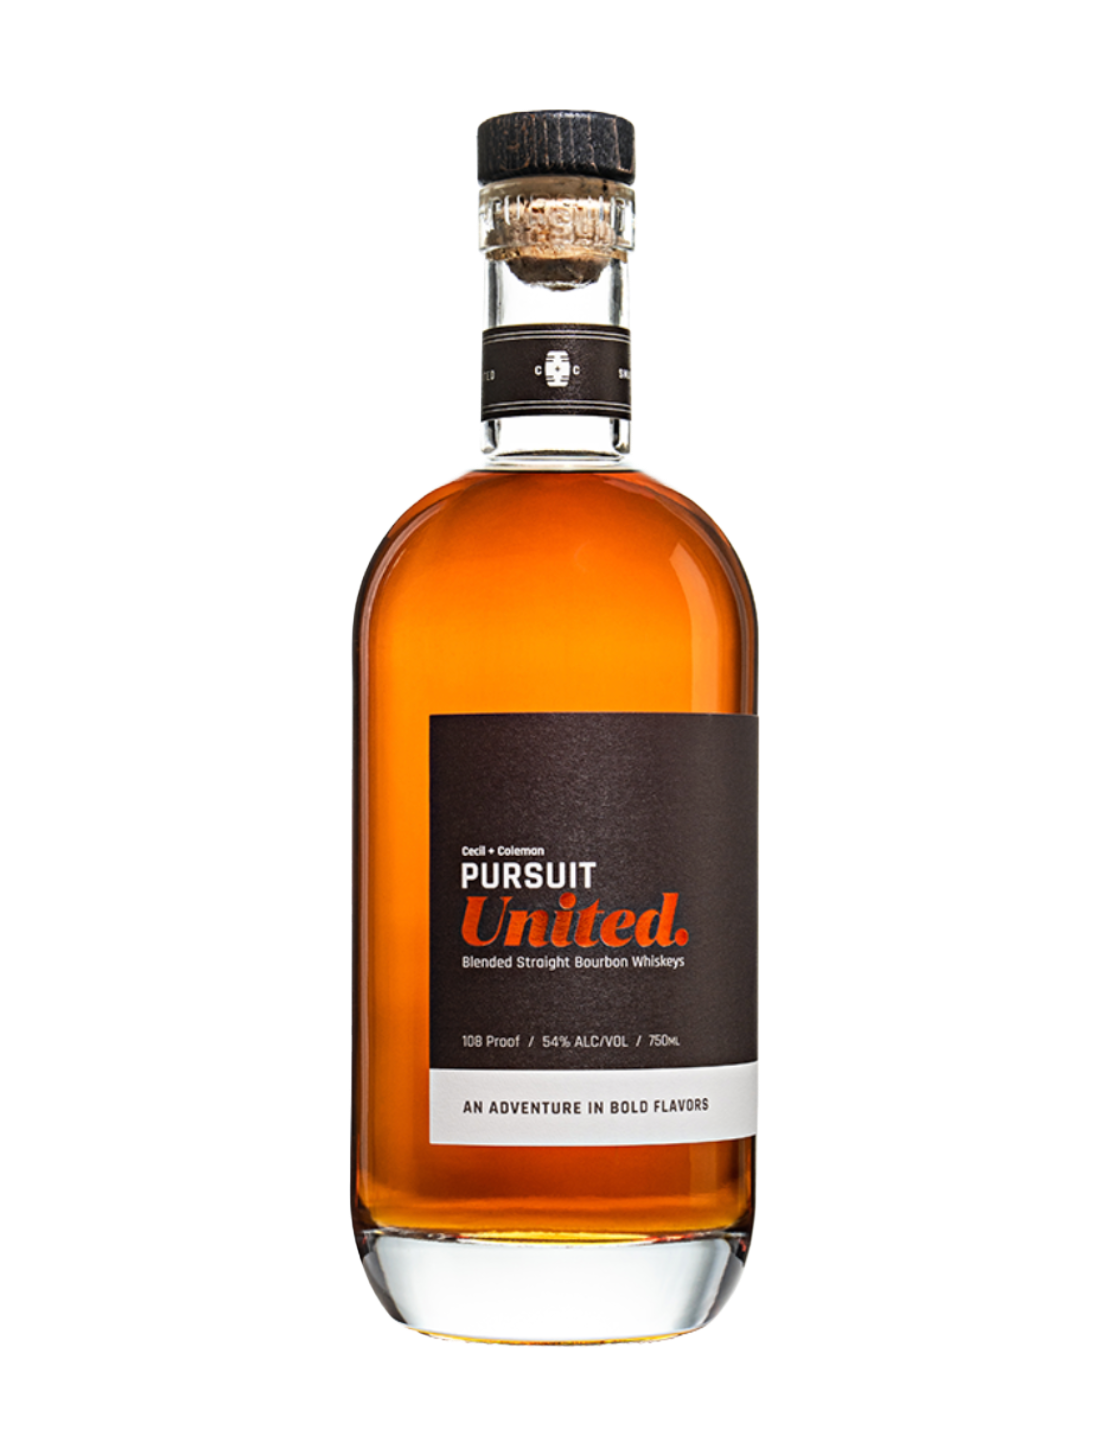 An elegant bottle of Pursuit United Straight Bourbon in front of a plain white background